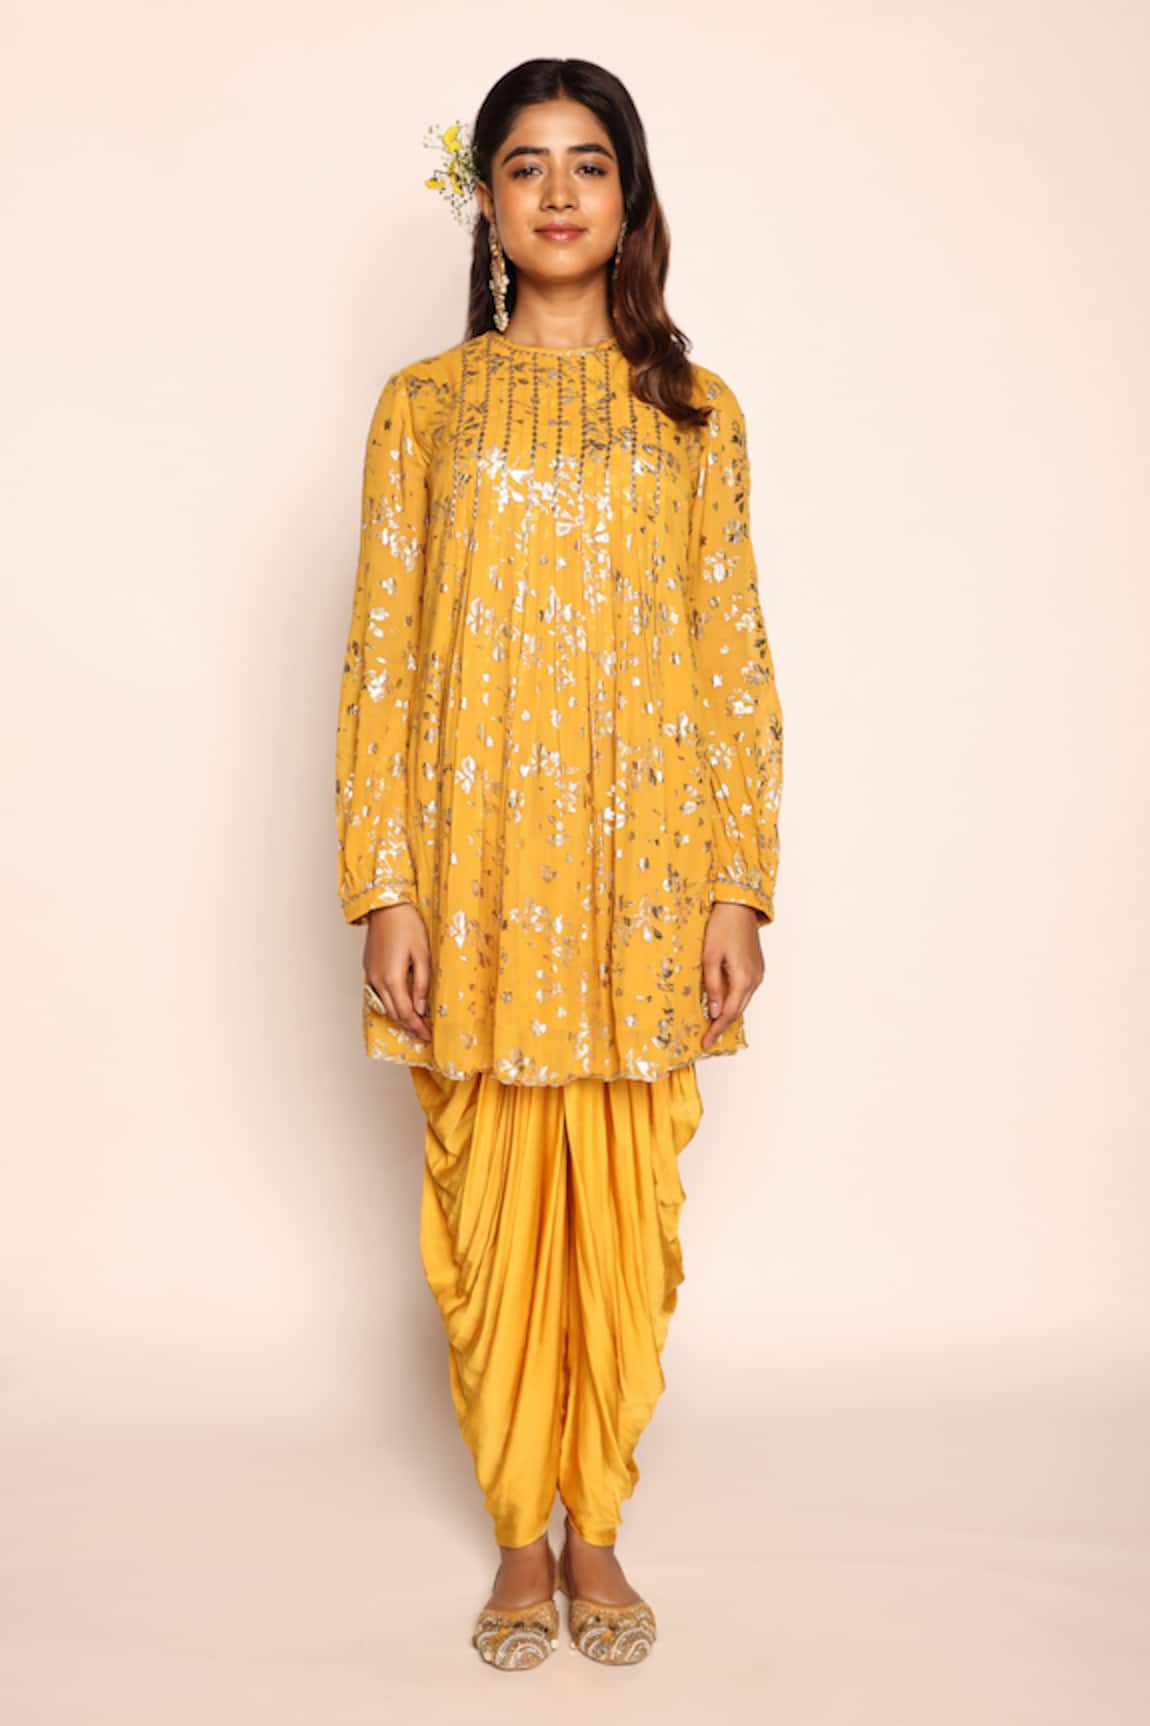 ABSTRACT BY MEGHA JAIN MADAAN Pansy Fleur Foil Print Pleated Flare Tunic With Dhoti Pant